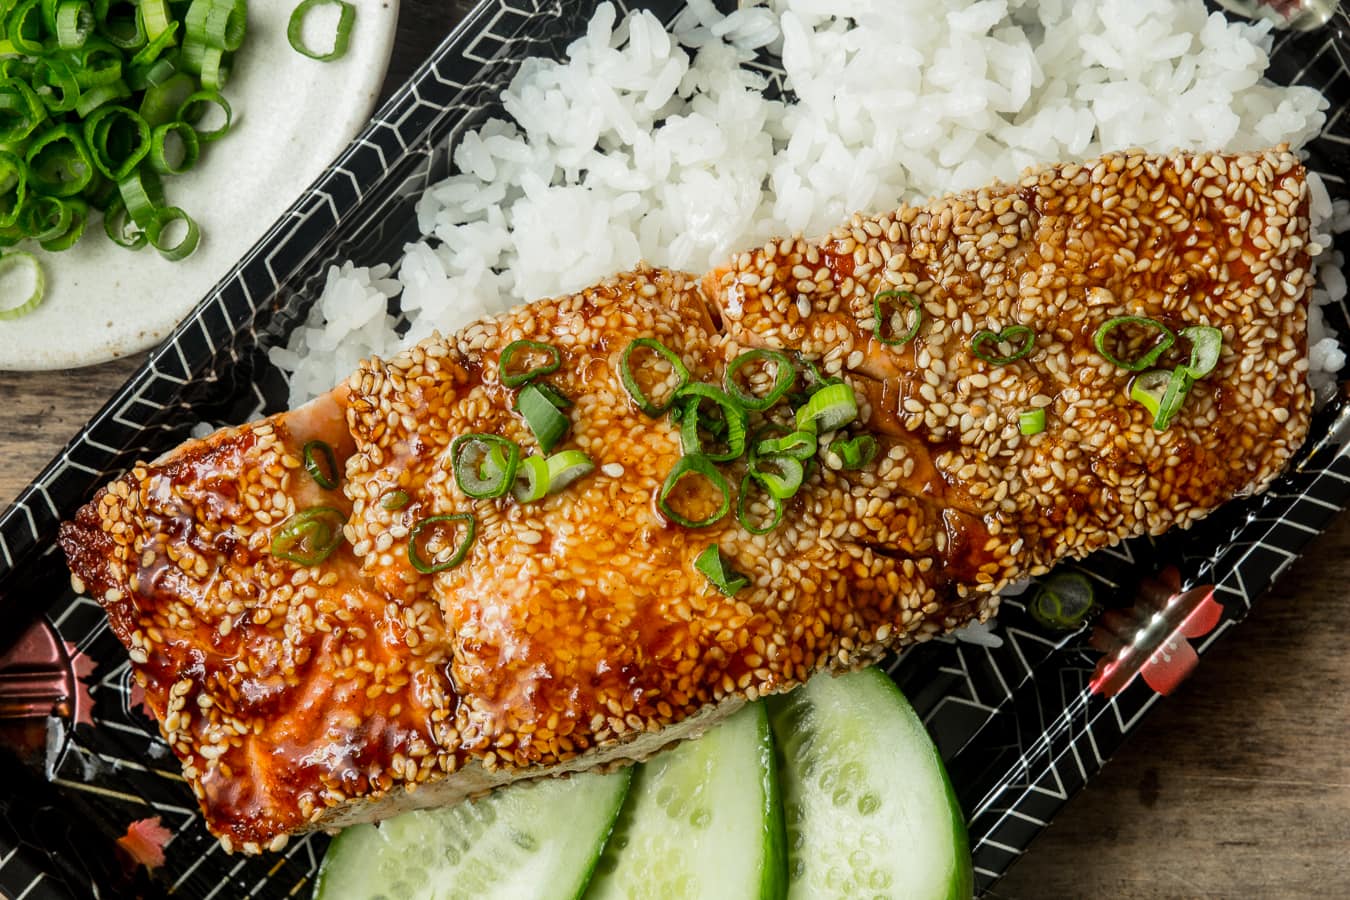 Teriyaki salmon fish served with rice and a side of cucumbers